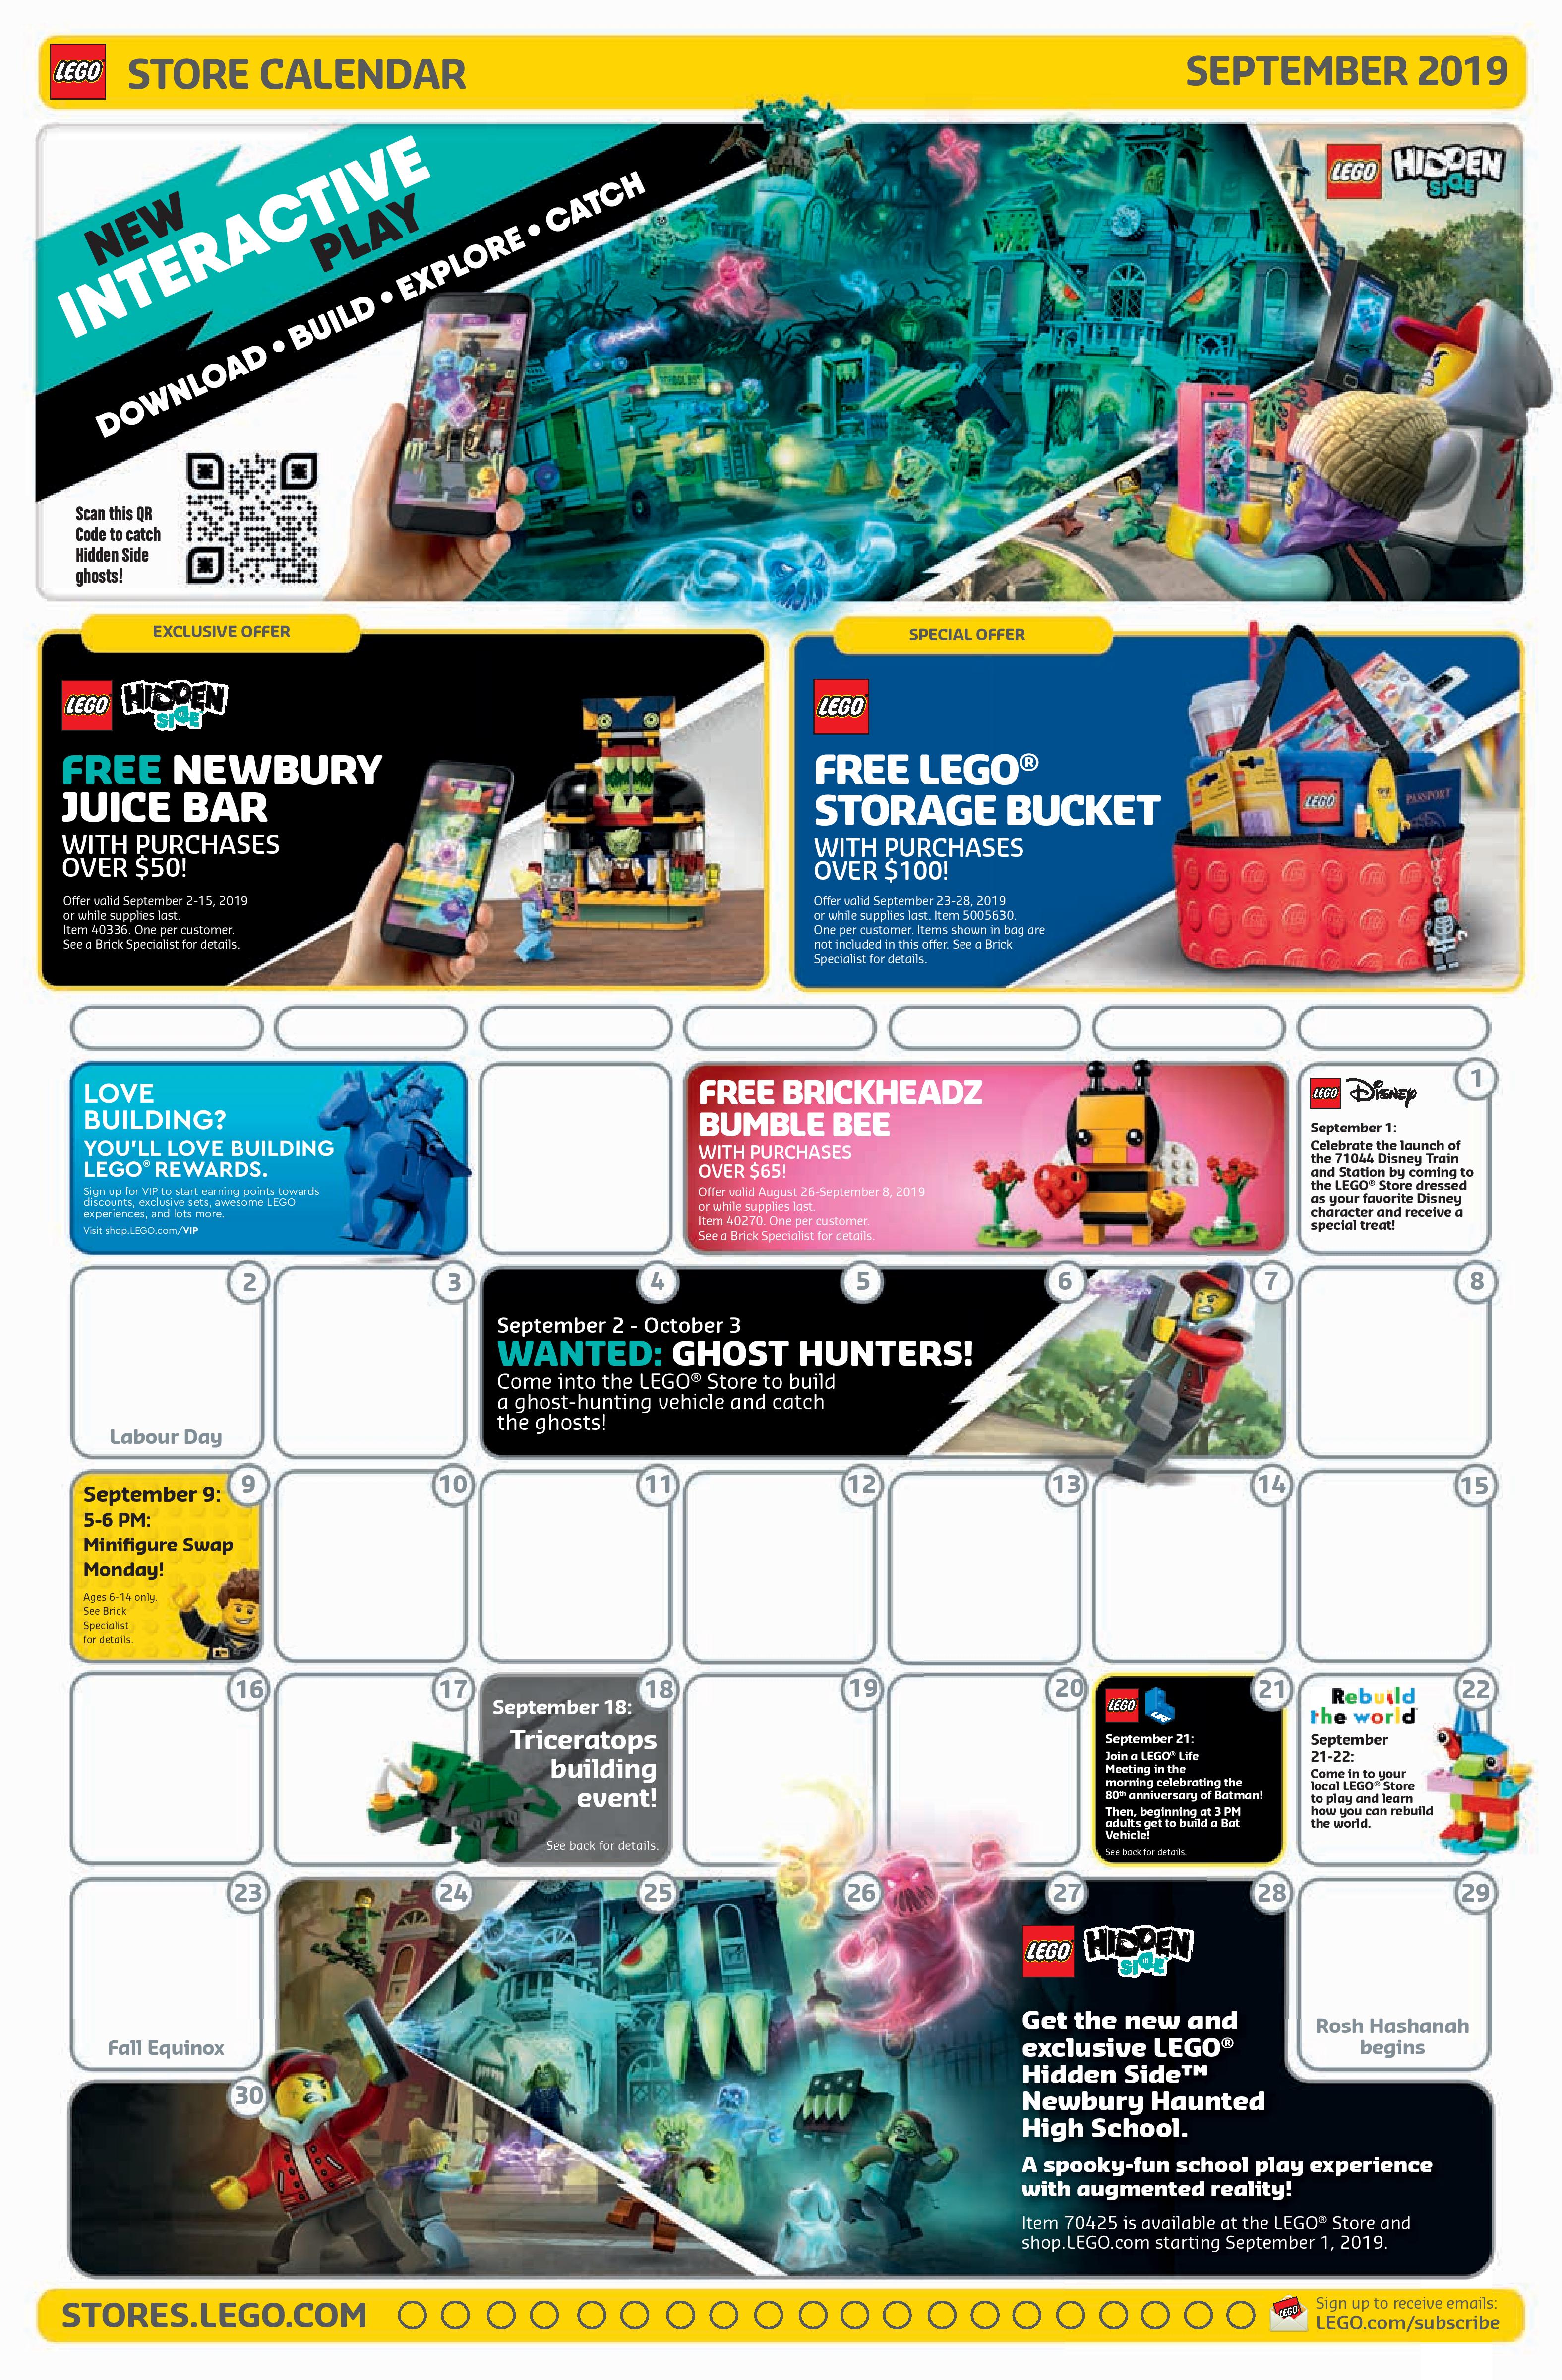 LEGO September 2019 Store Calendar Promotions & Events The Brick Fan